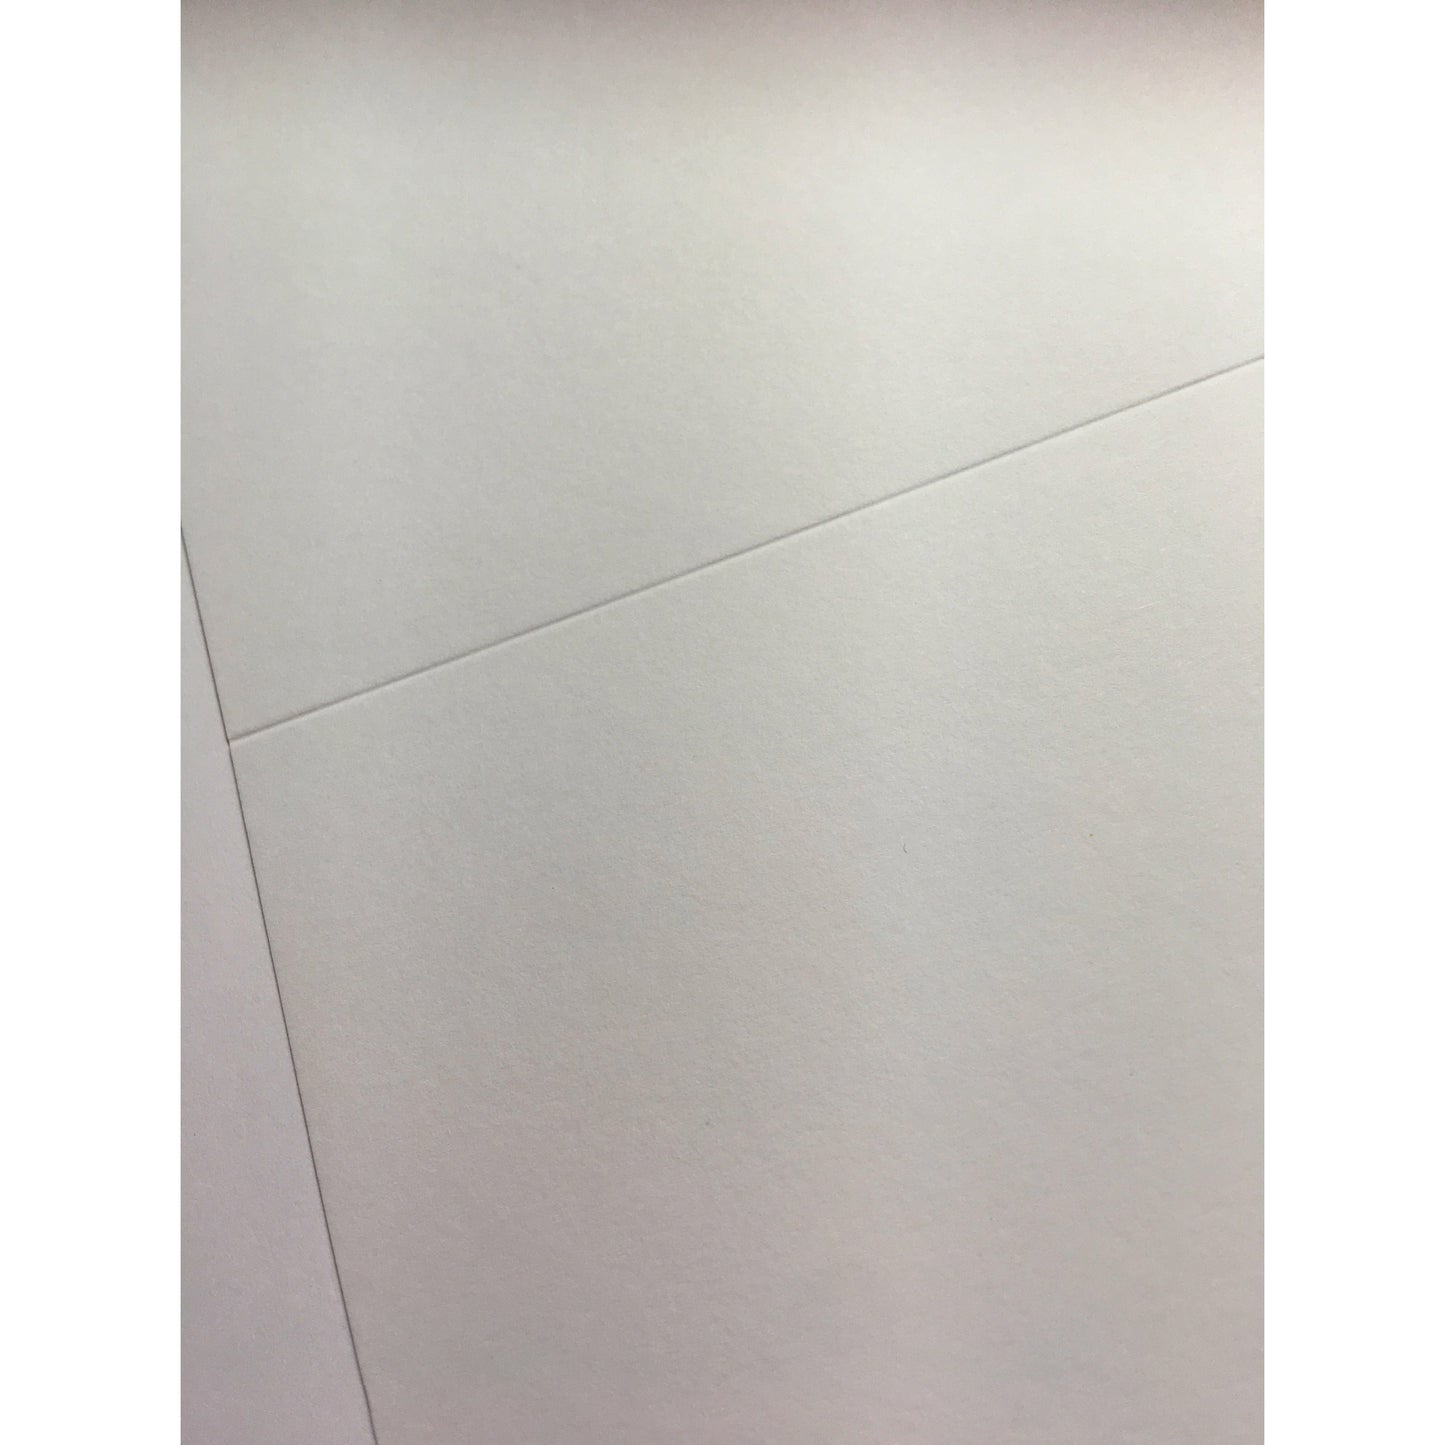 White Smooth Card 300gsm Pack of 20 Sheets Choose Size